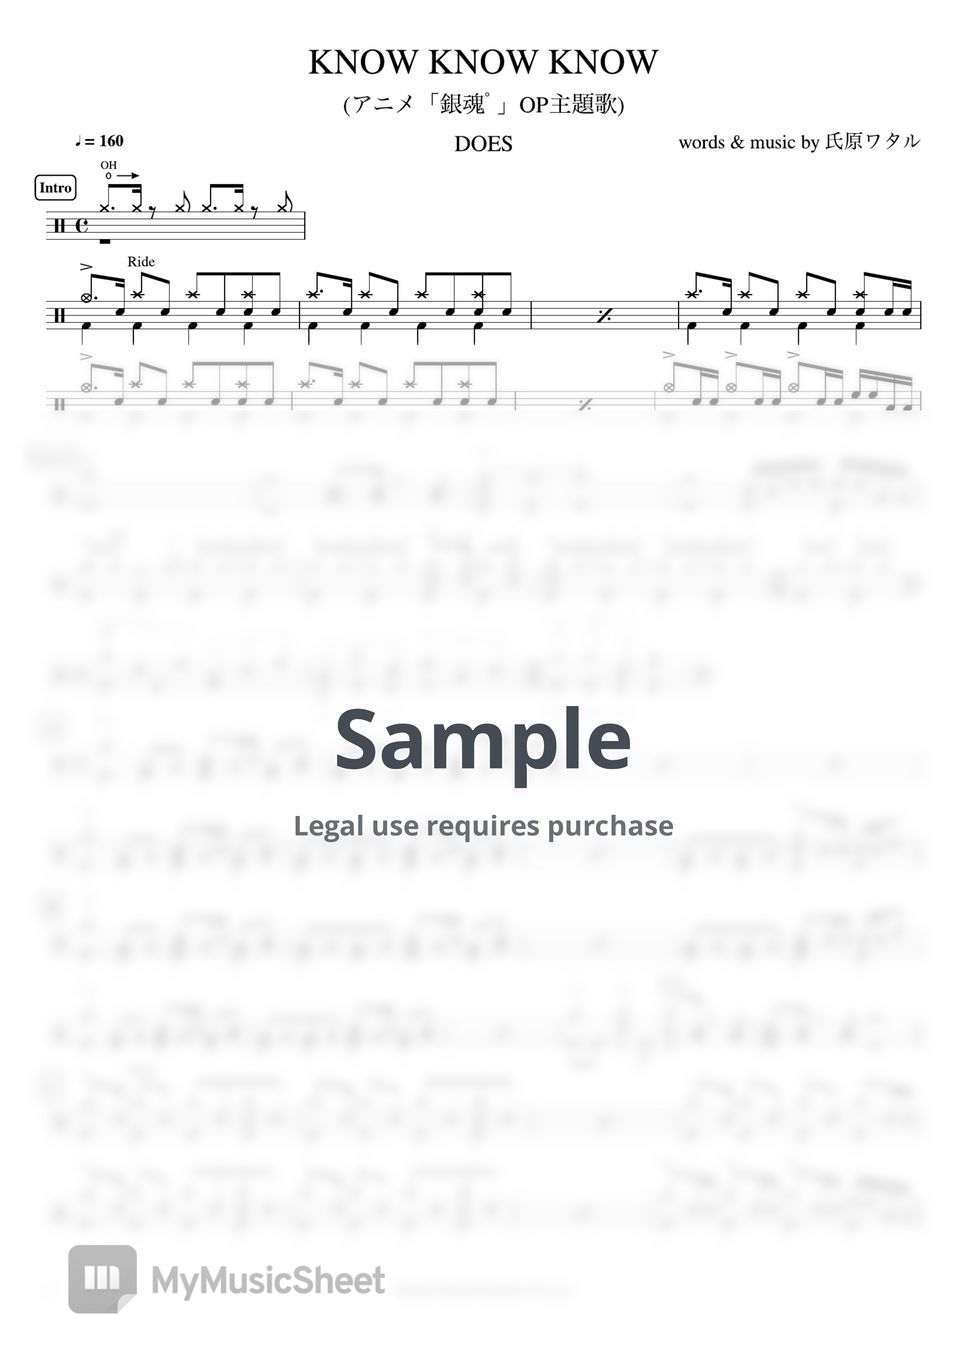 DOES - KNOW KNOW KNOW (アニメ「銀魂ﾟ」OP主題歌) by Cookai's J-pop Drum sheet music!!!